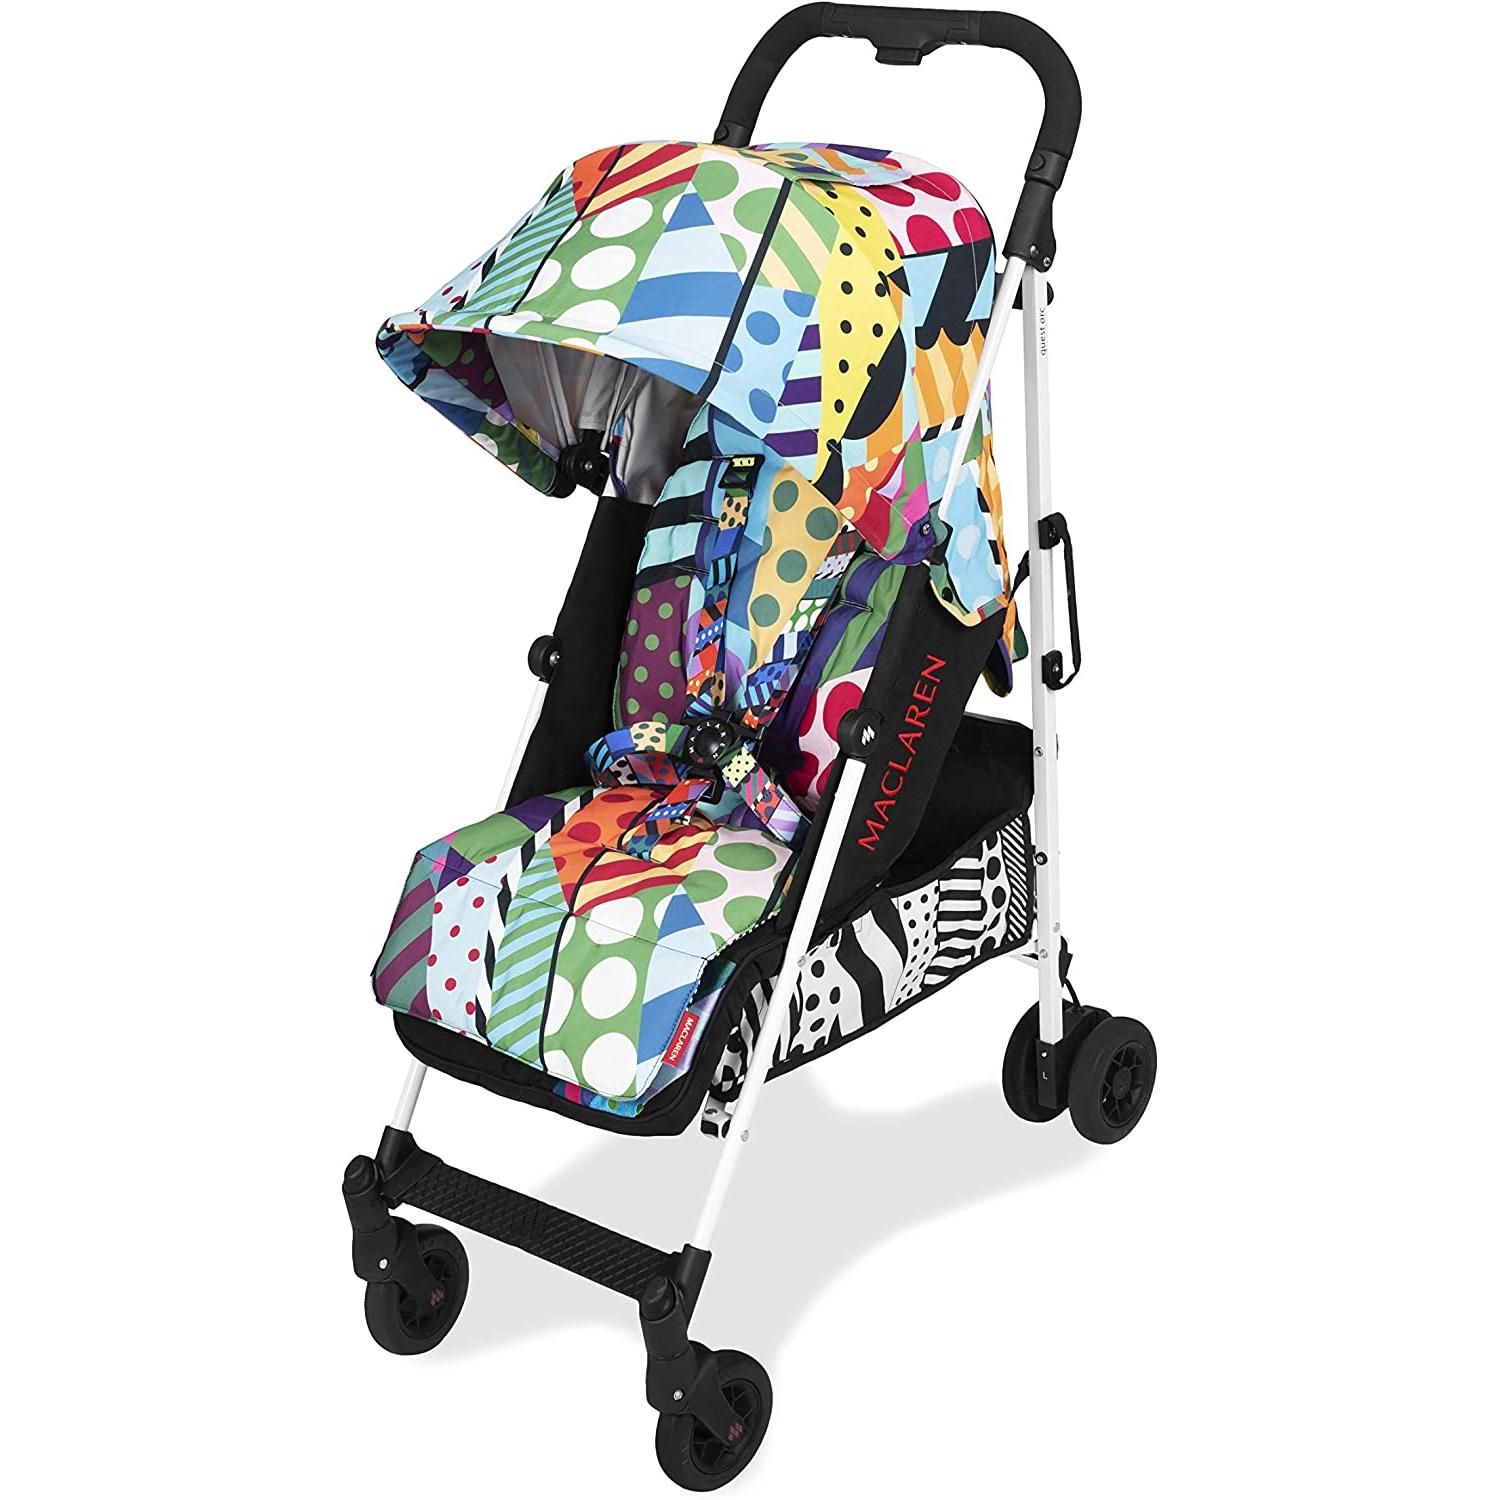 instock] Maclaren Quest arc Jason Woodside Stroller- for Newborns+, Lightweight, Compact, Featured. Easy to Steer, fold, Carry. Extended Hood, Reclining seat, 4 Wheel Accessories Included., Babies & Kids, Maternity Care